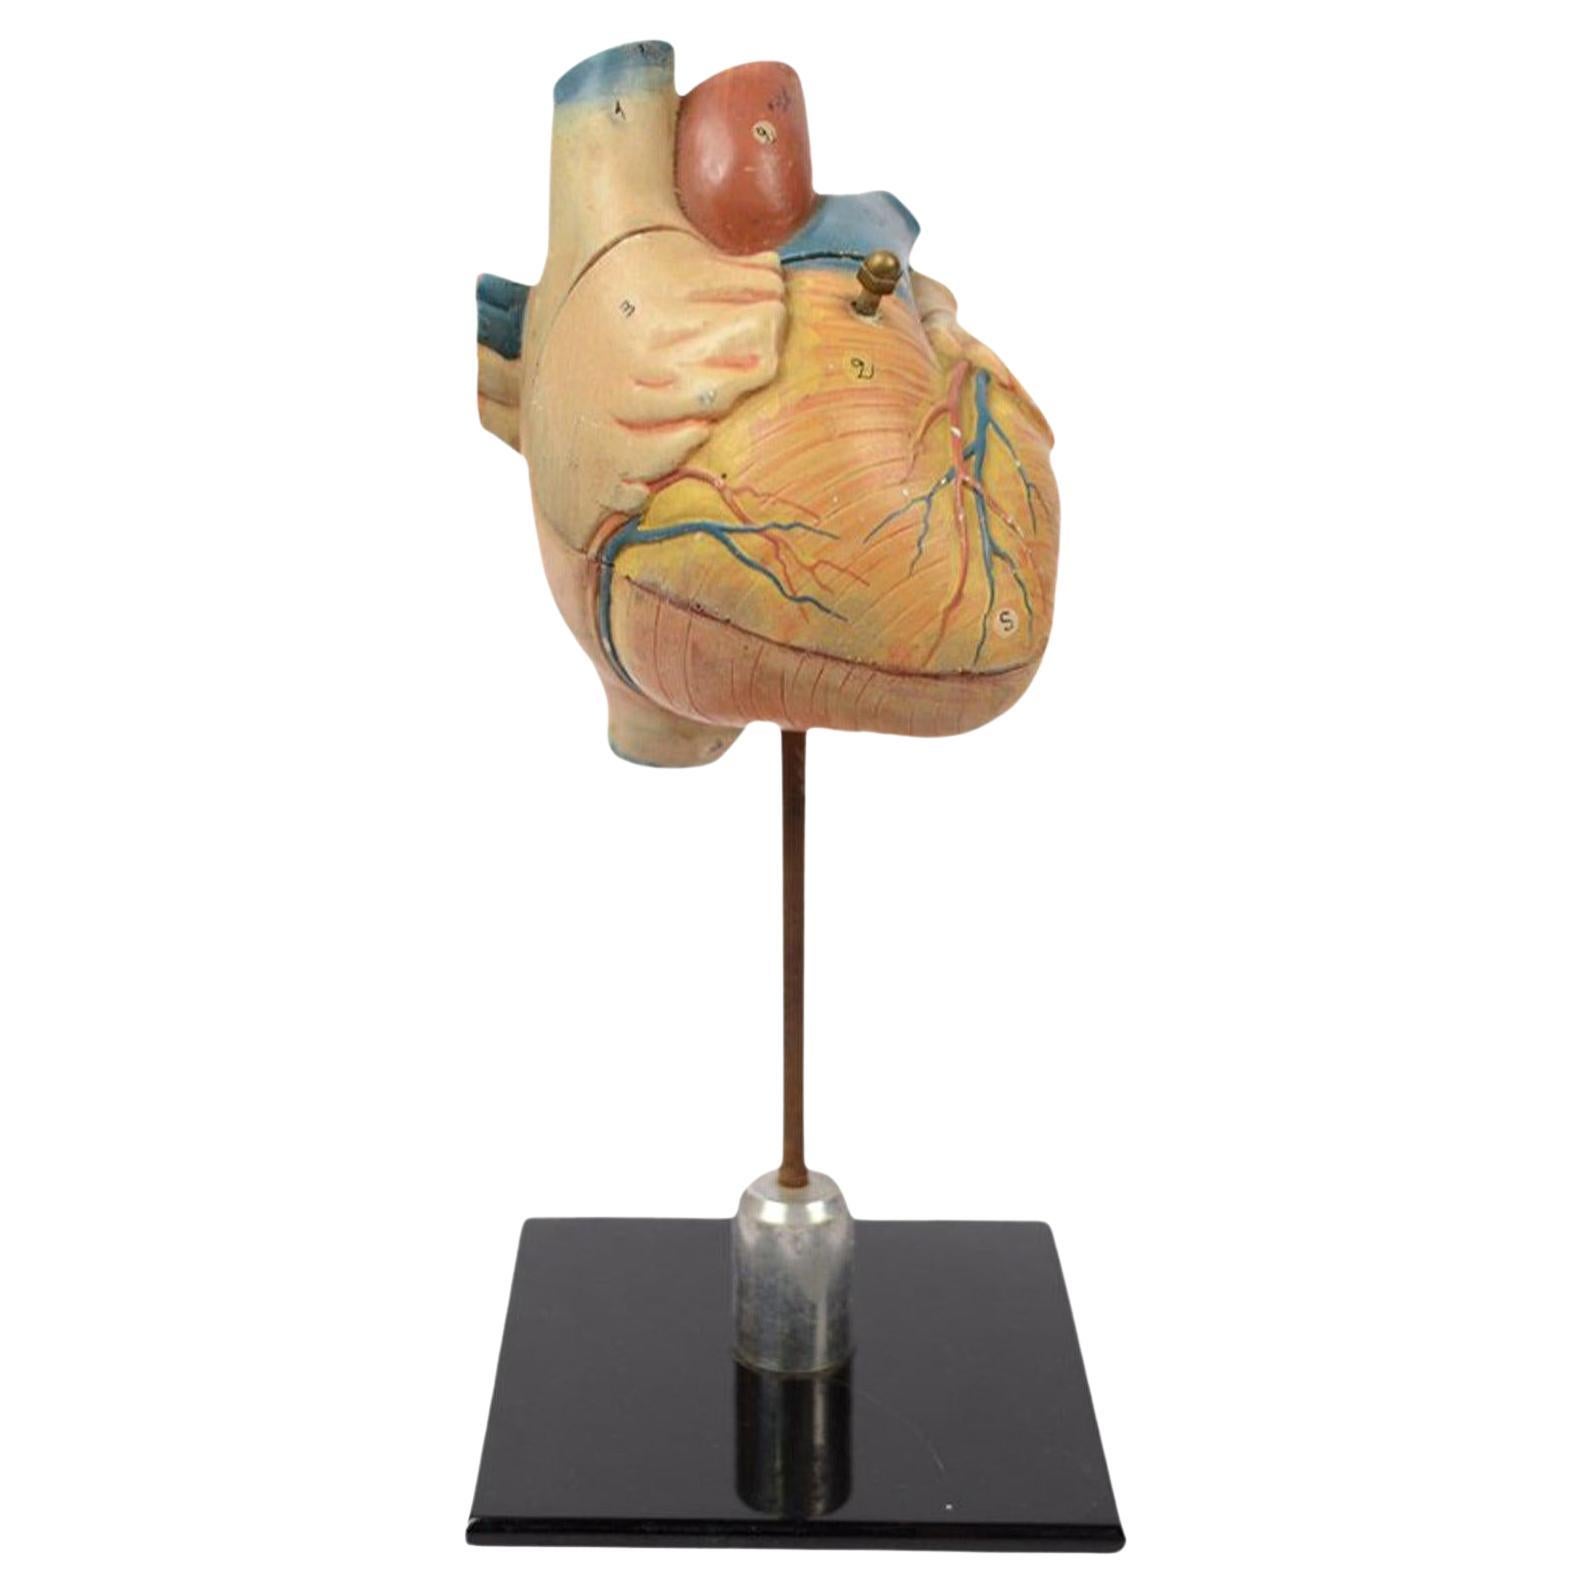 Vintage Medical Didactic Anatomical Model of a Small Heart, Germany, 1950s